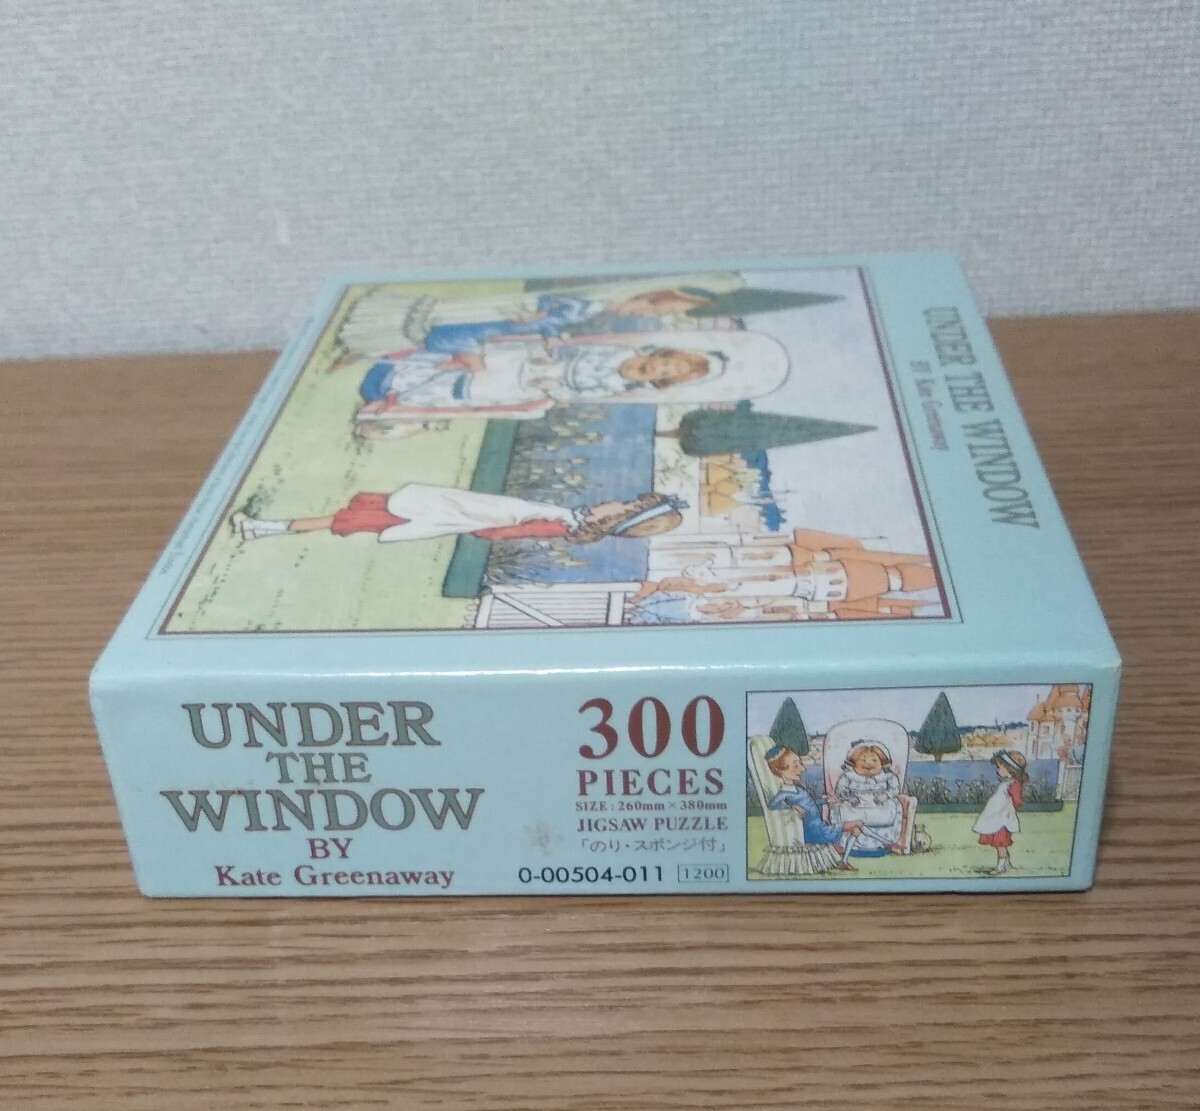 kate Greenaway jigsaw puzzle 300 piece Ander The Window inside sack unopened goods 